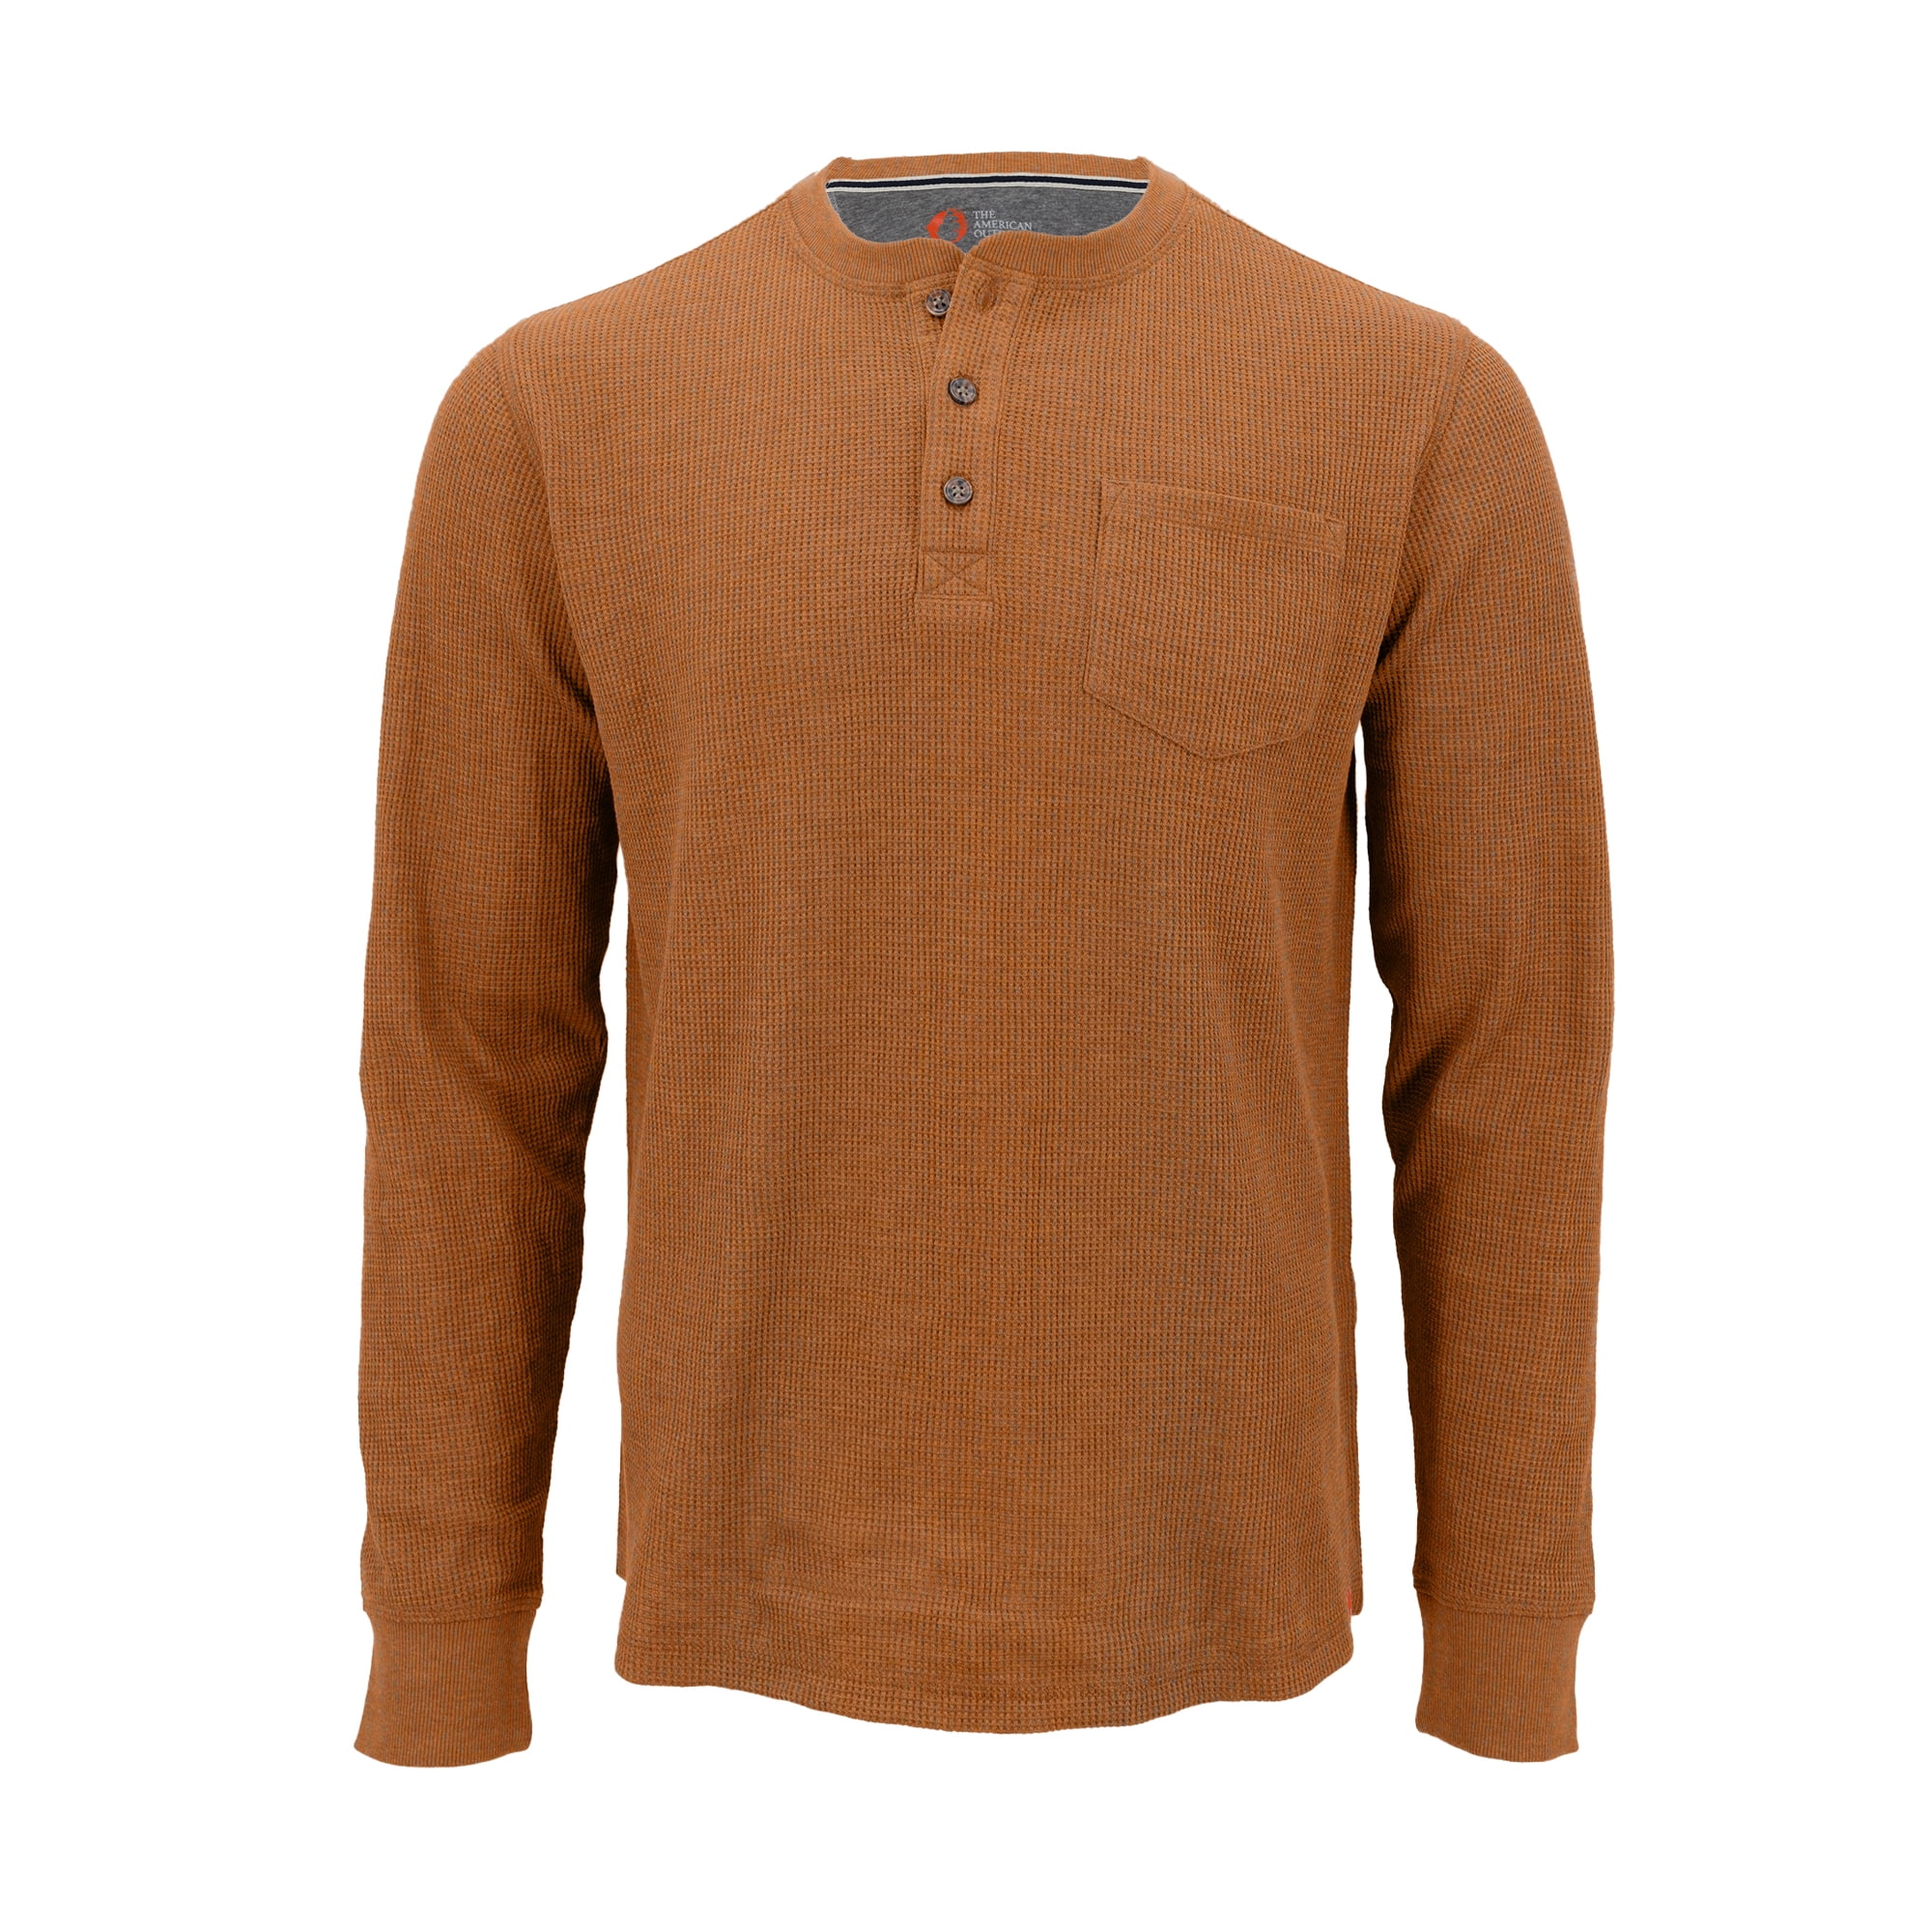 The American Outdoorsman Long-Sleeve Waffle Henley Shirts For Men